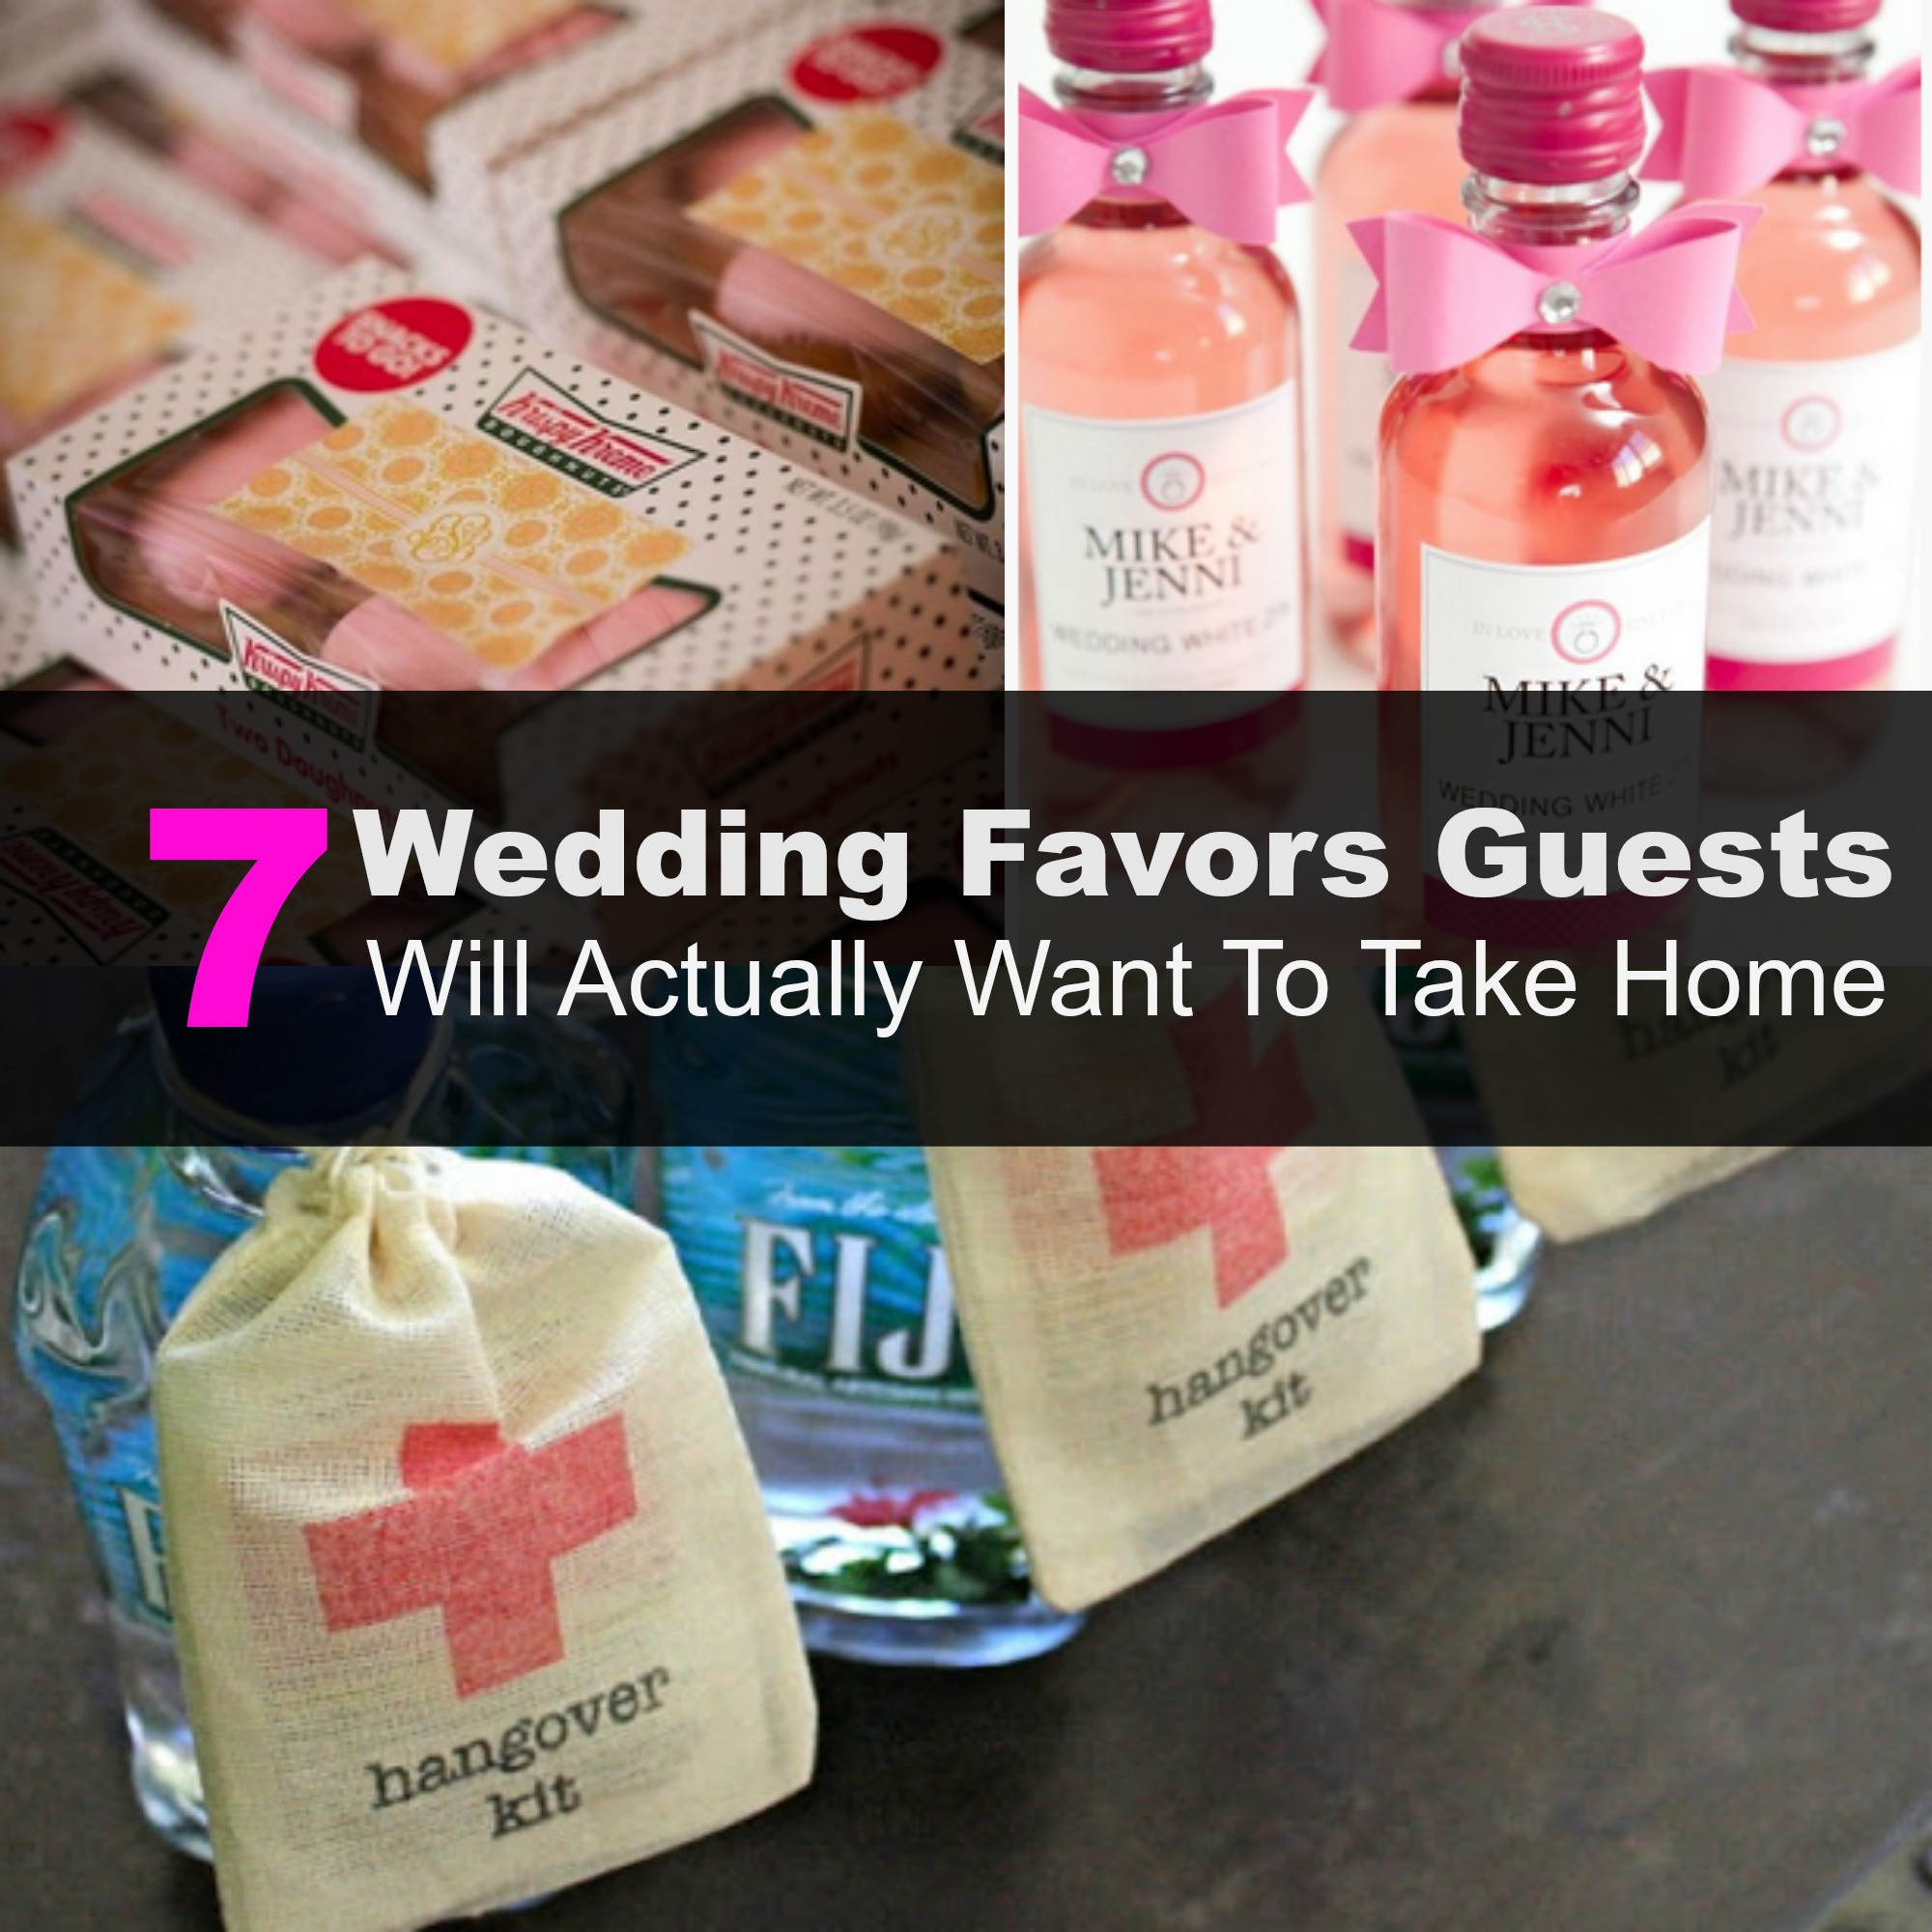 Free Wedding Favor Samples
 7 Wedding Favors Your Guests Will Actually Want 2016